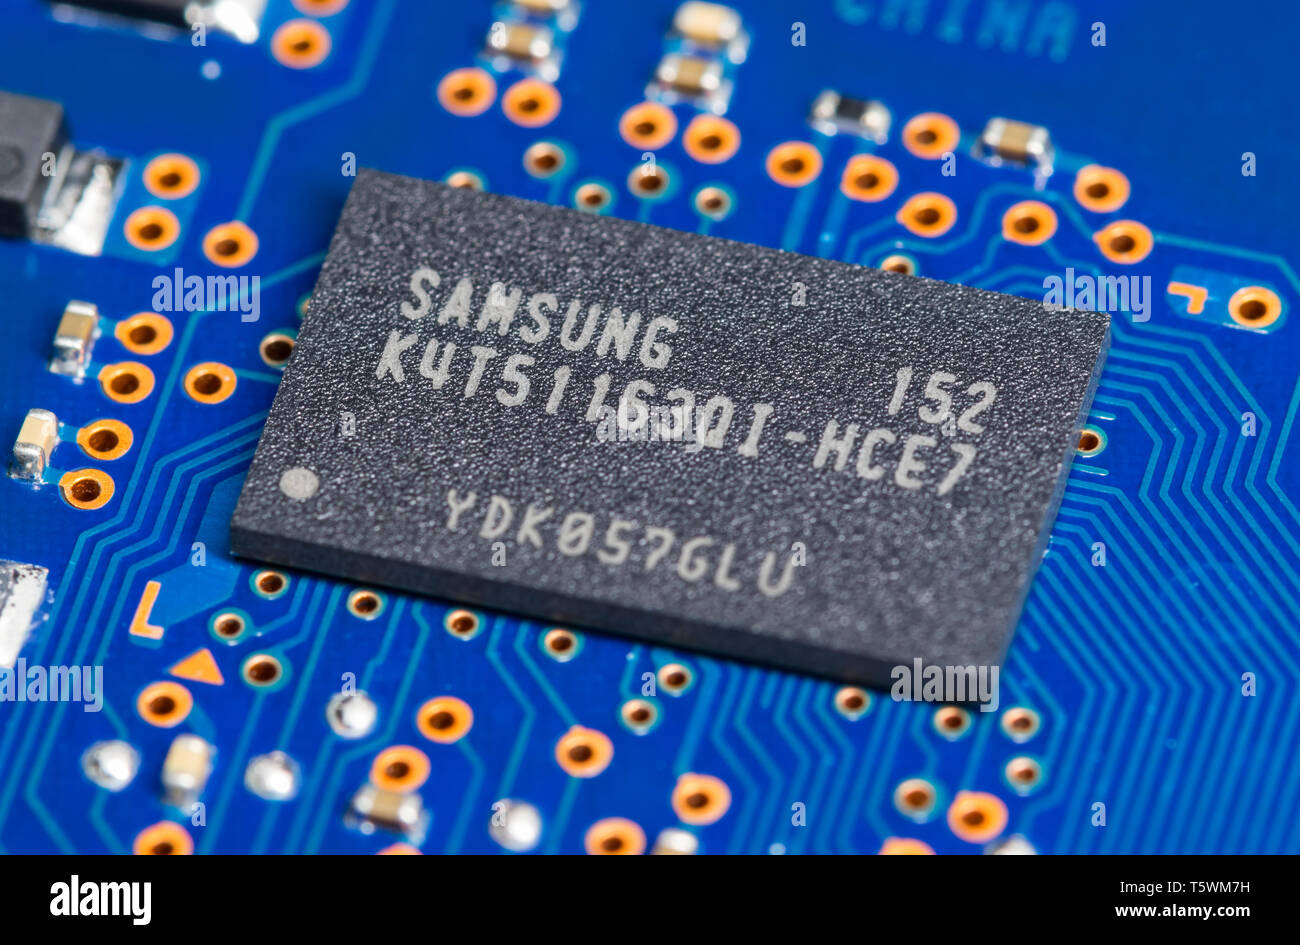 Samsung DDR2 SDRAM memory chip in a FBGA package mounted on a PCB for a hard disk drive. Stock Photo